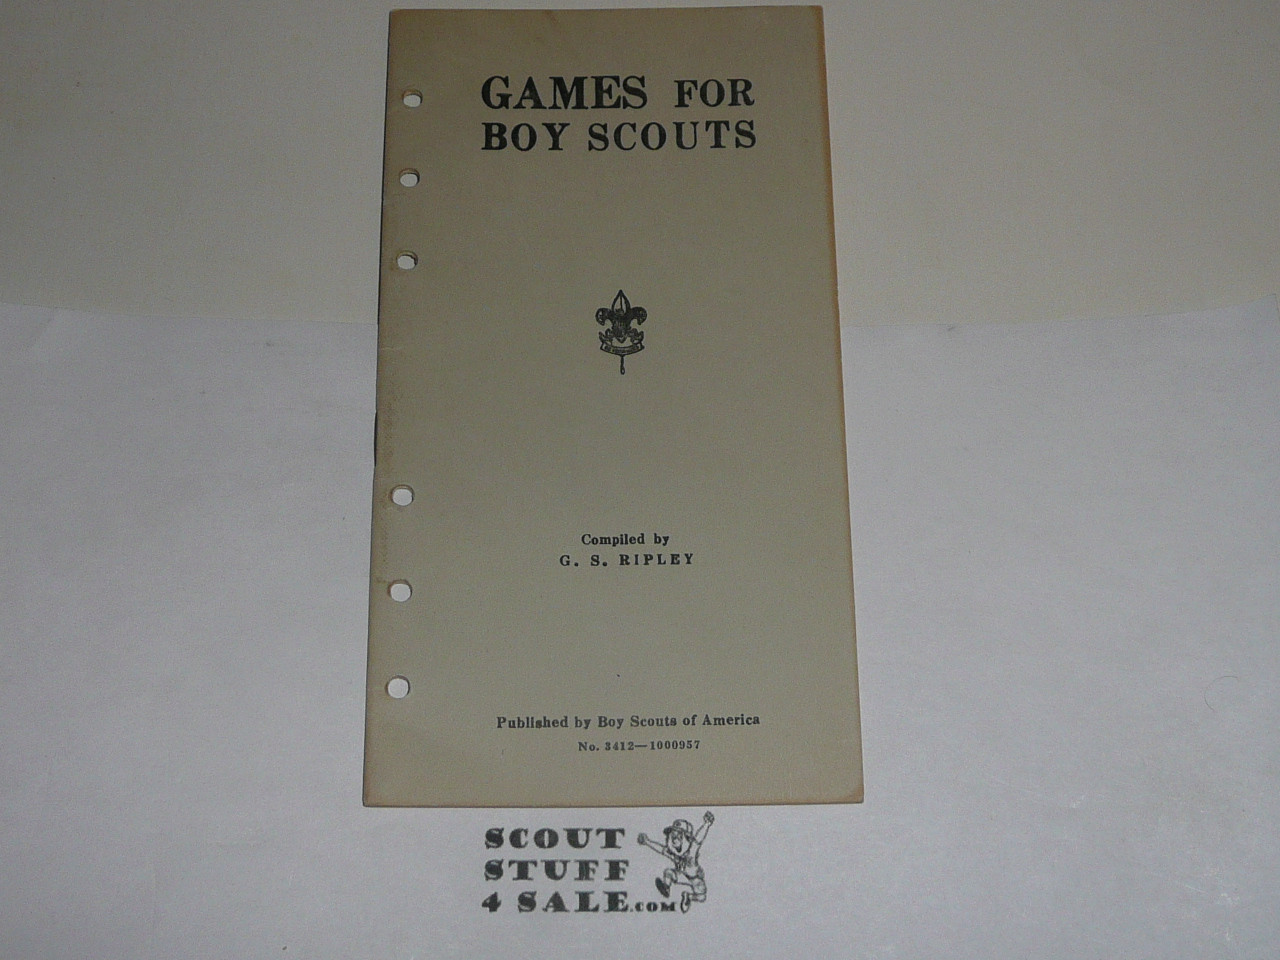 Lefax Boy Scout Fieldbook Insert, Games for Boy Scouts, May 1956, Official BSA